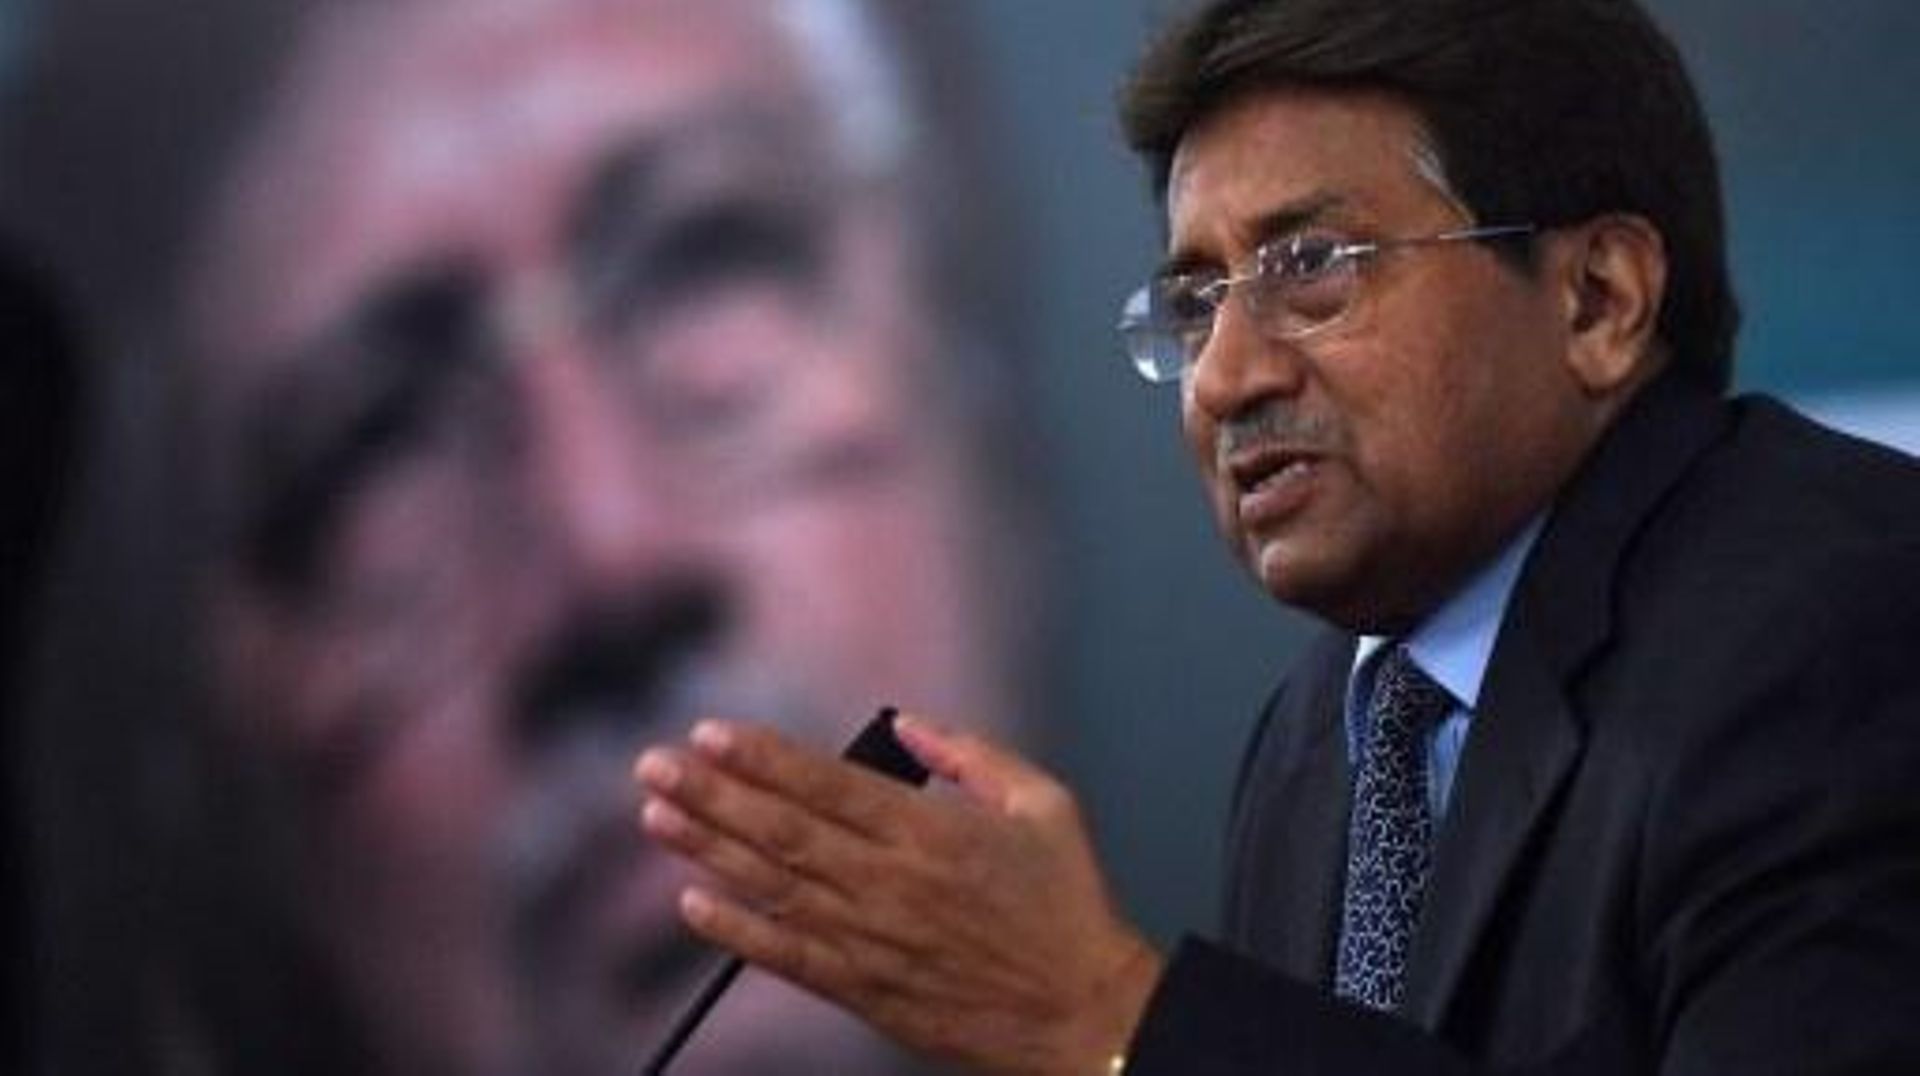 Former Pakistani president and military ruler, Pervez Musharraf addresses a youth parliament in Karachi on December 4, 2014. Musharraf gave a historical account of militancy in the country during his address.  AFP PHOTO/ Asif HASSAN